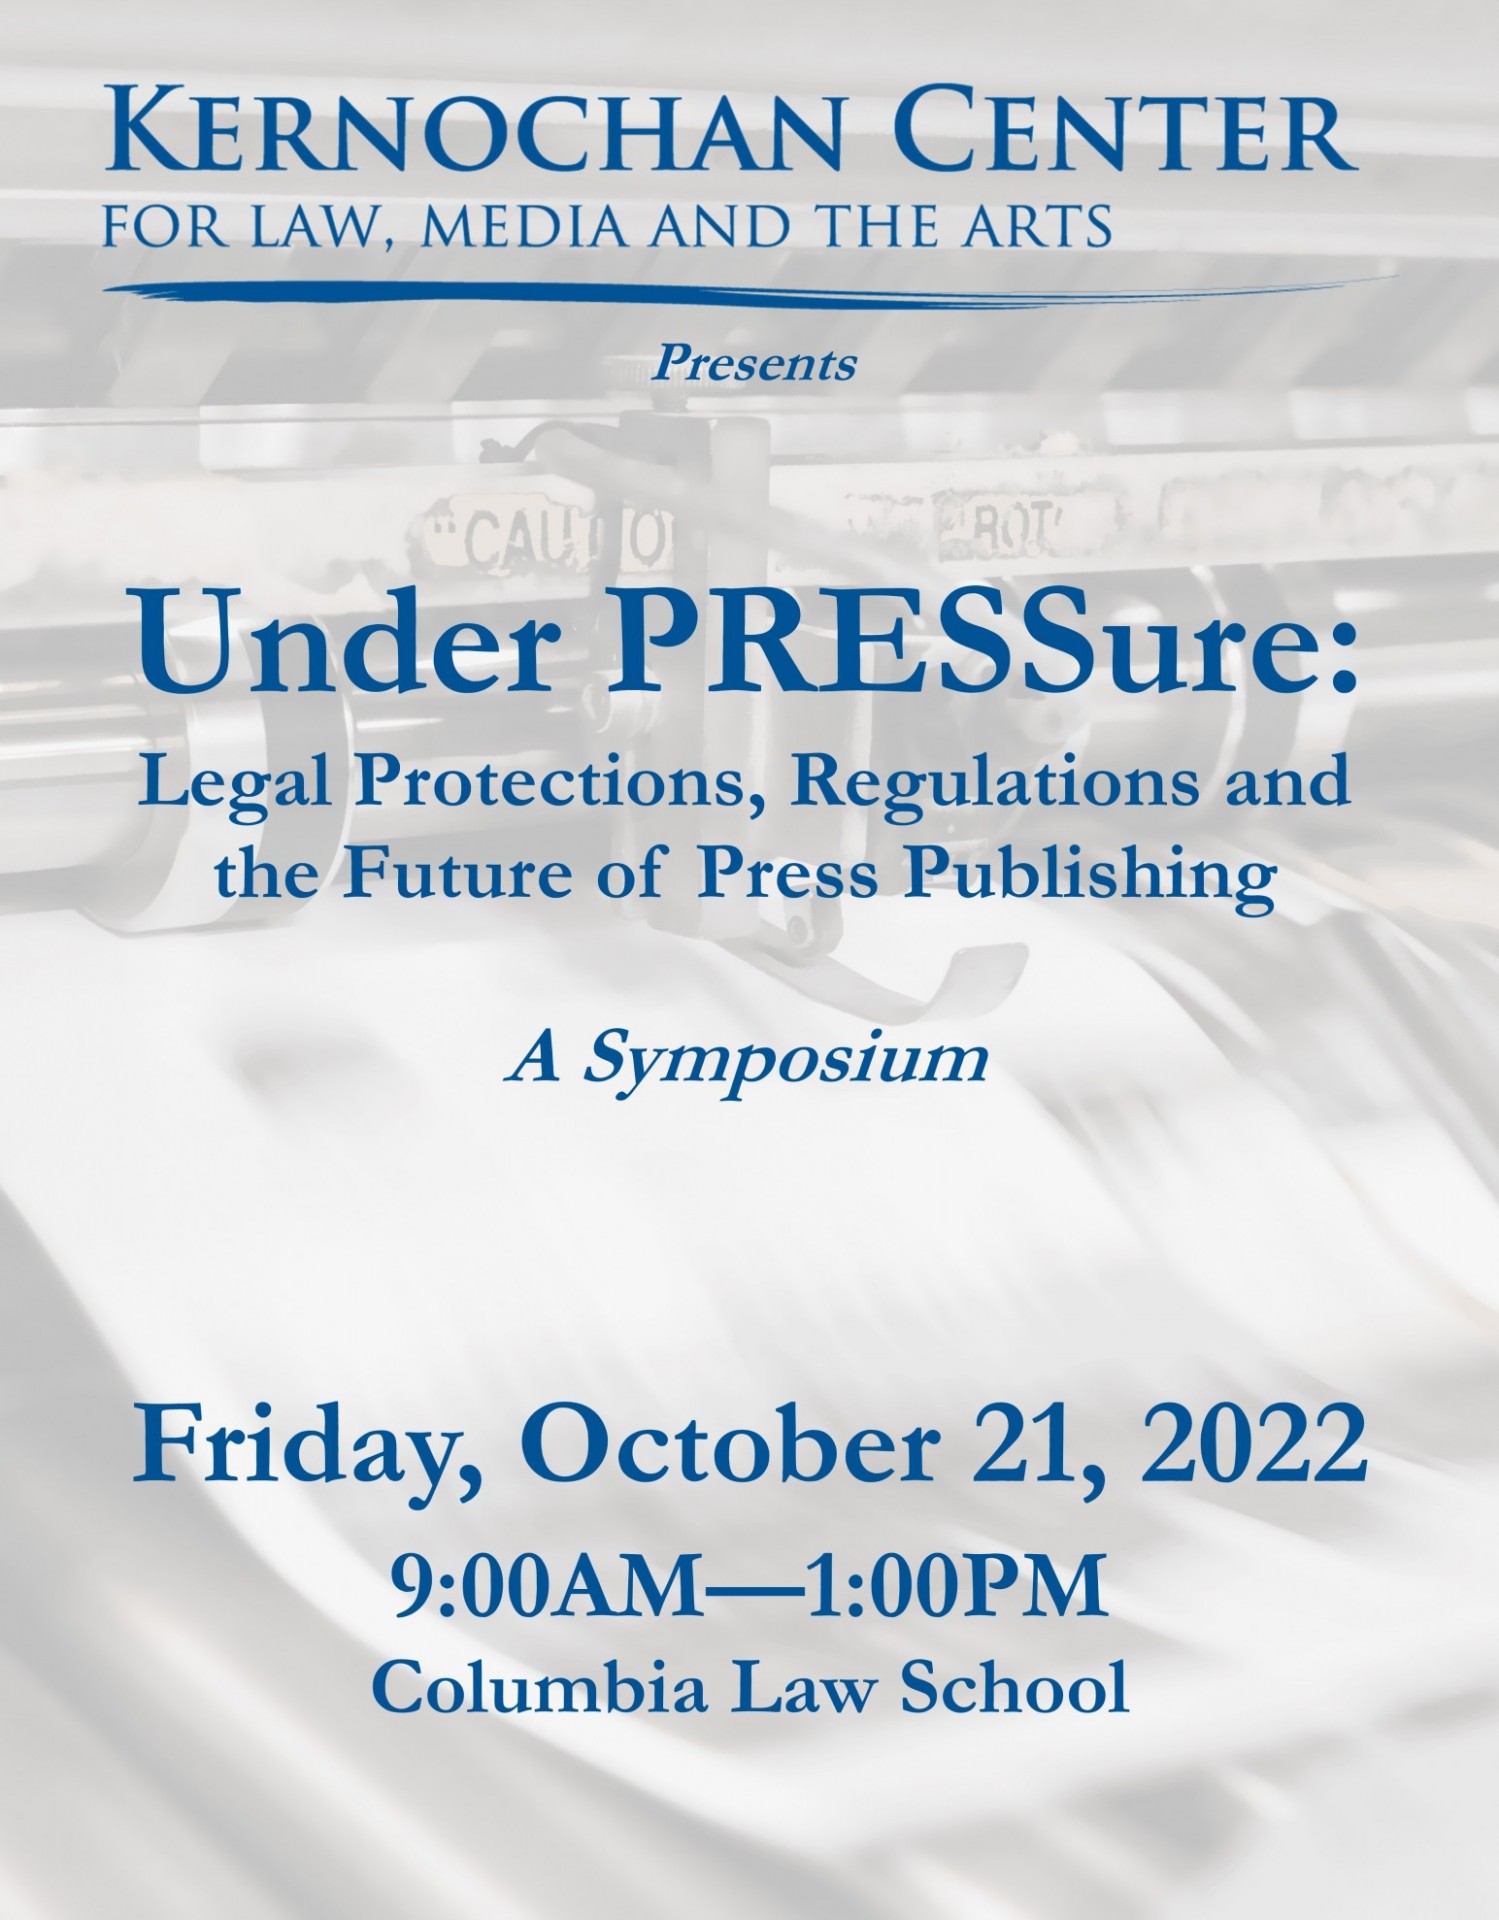 2022: Under PRESSure: Legal Protections, Regulations and the Future of Press Publishing